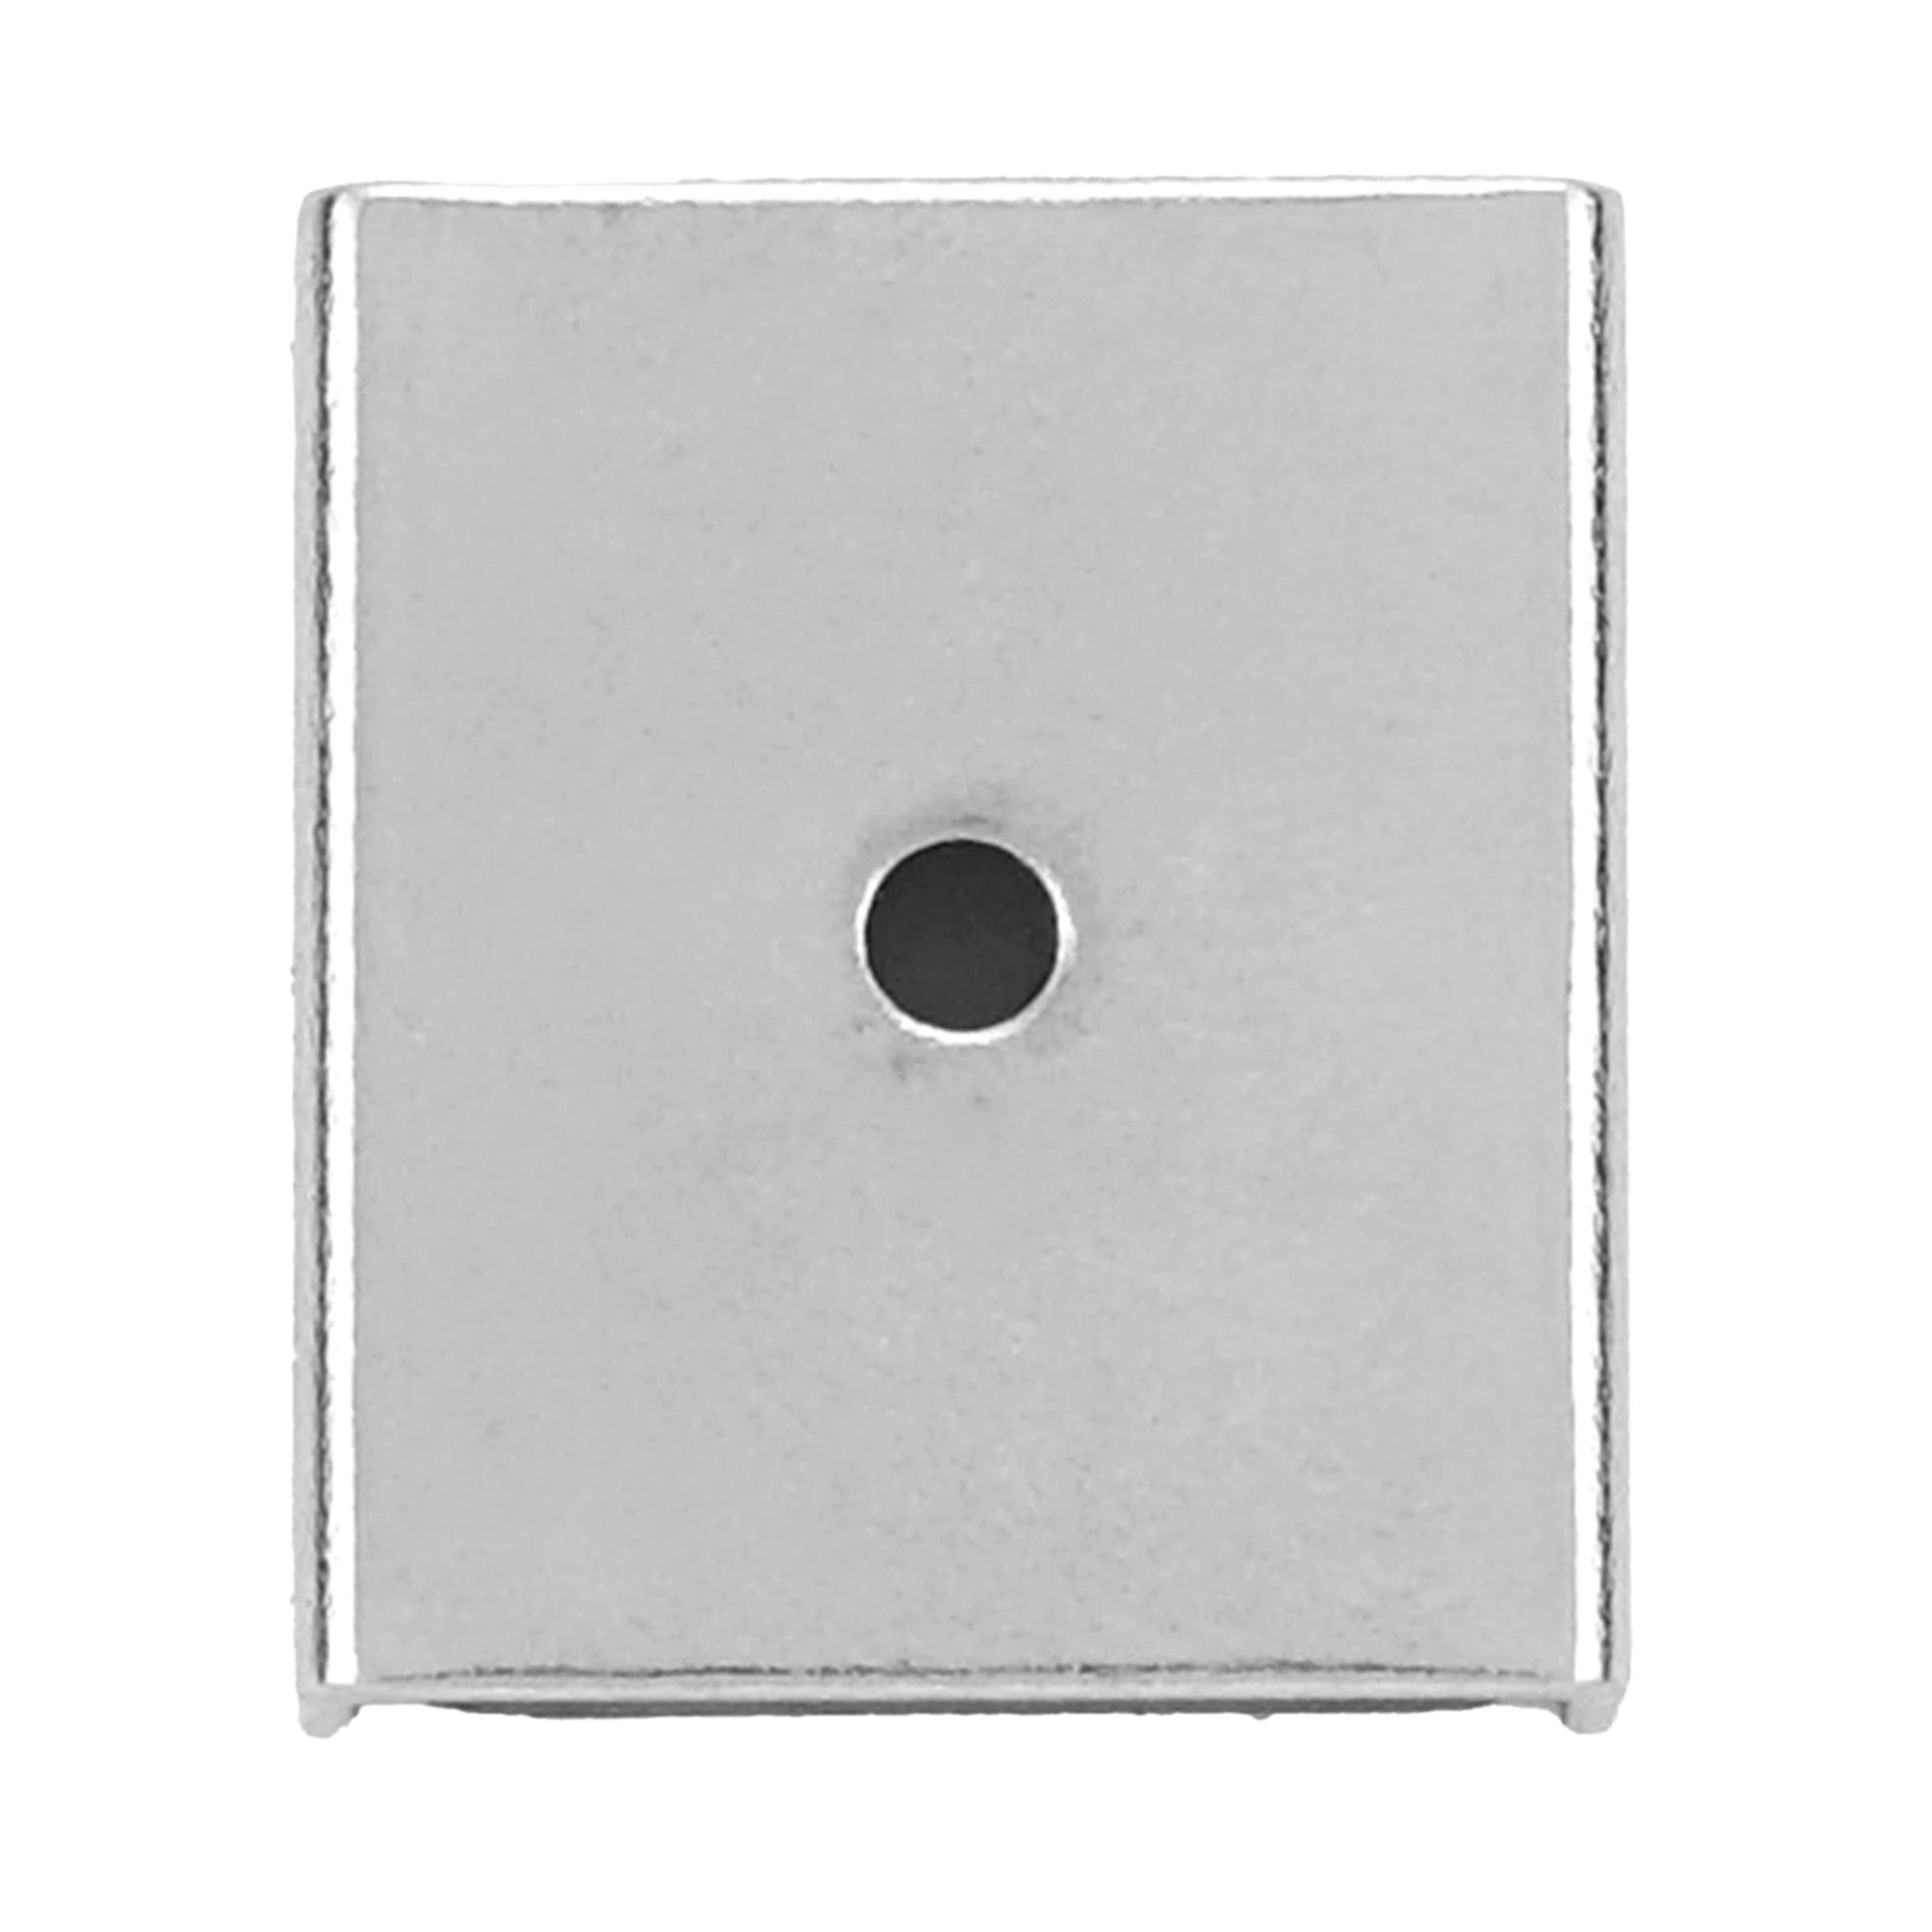 Load image into Gallery viewer, 07220 Ceramic Latch Magnet Channel Assemblies (2pk) - Back of Packaging